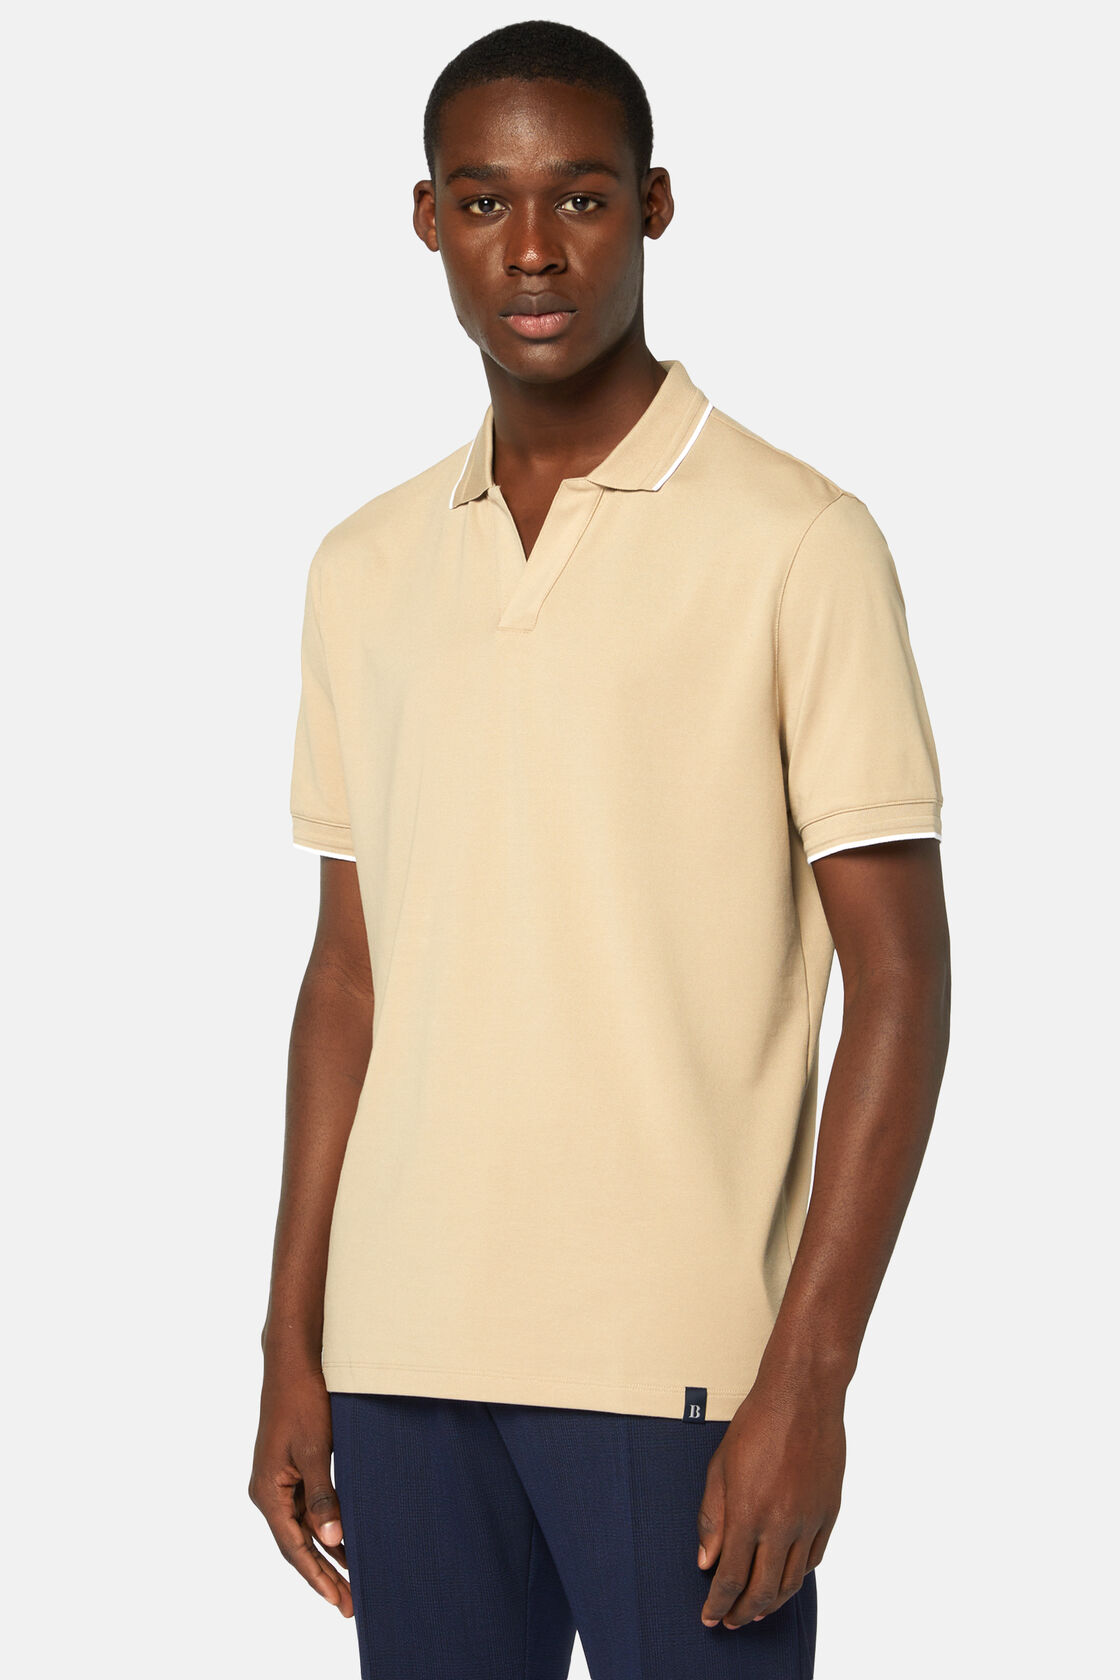 Polo in sustainable performance pique, Beige, hi-res